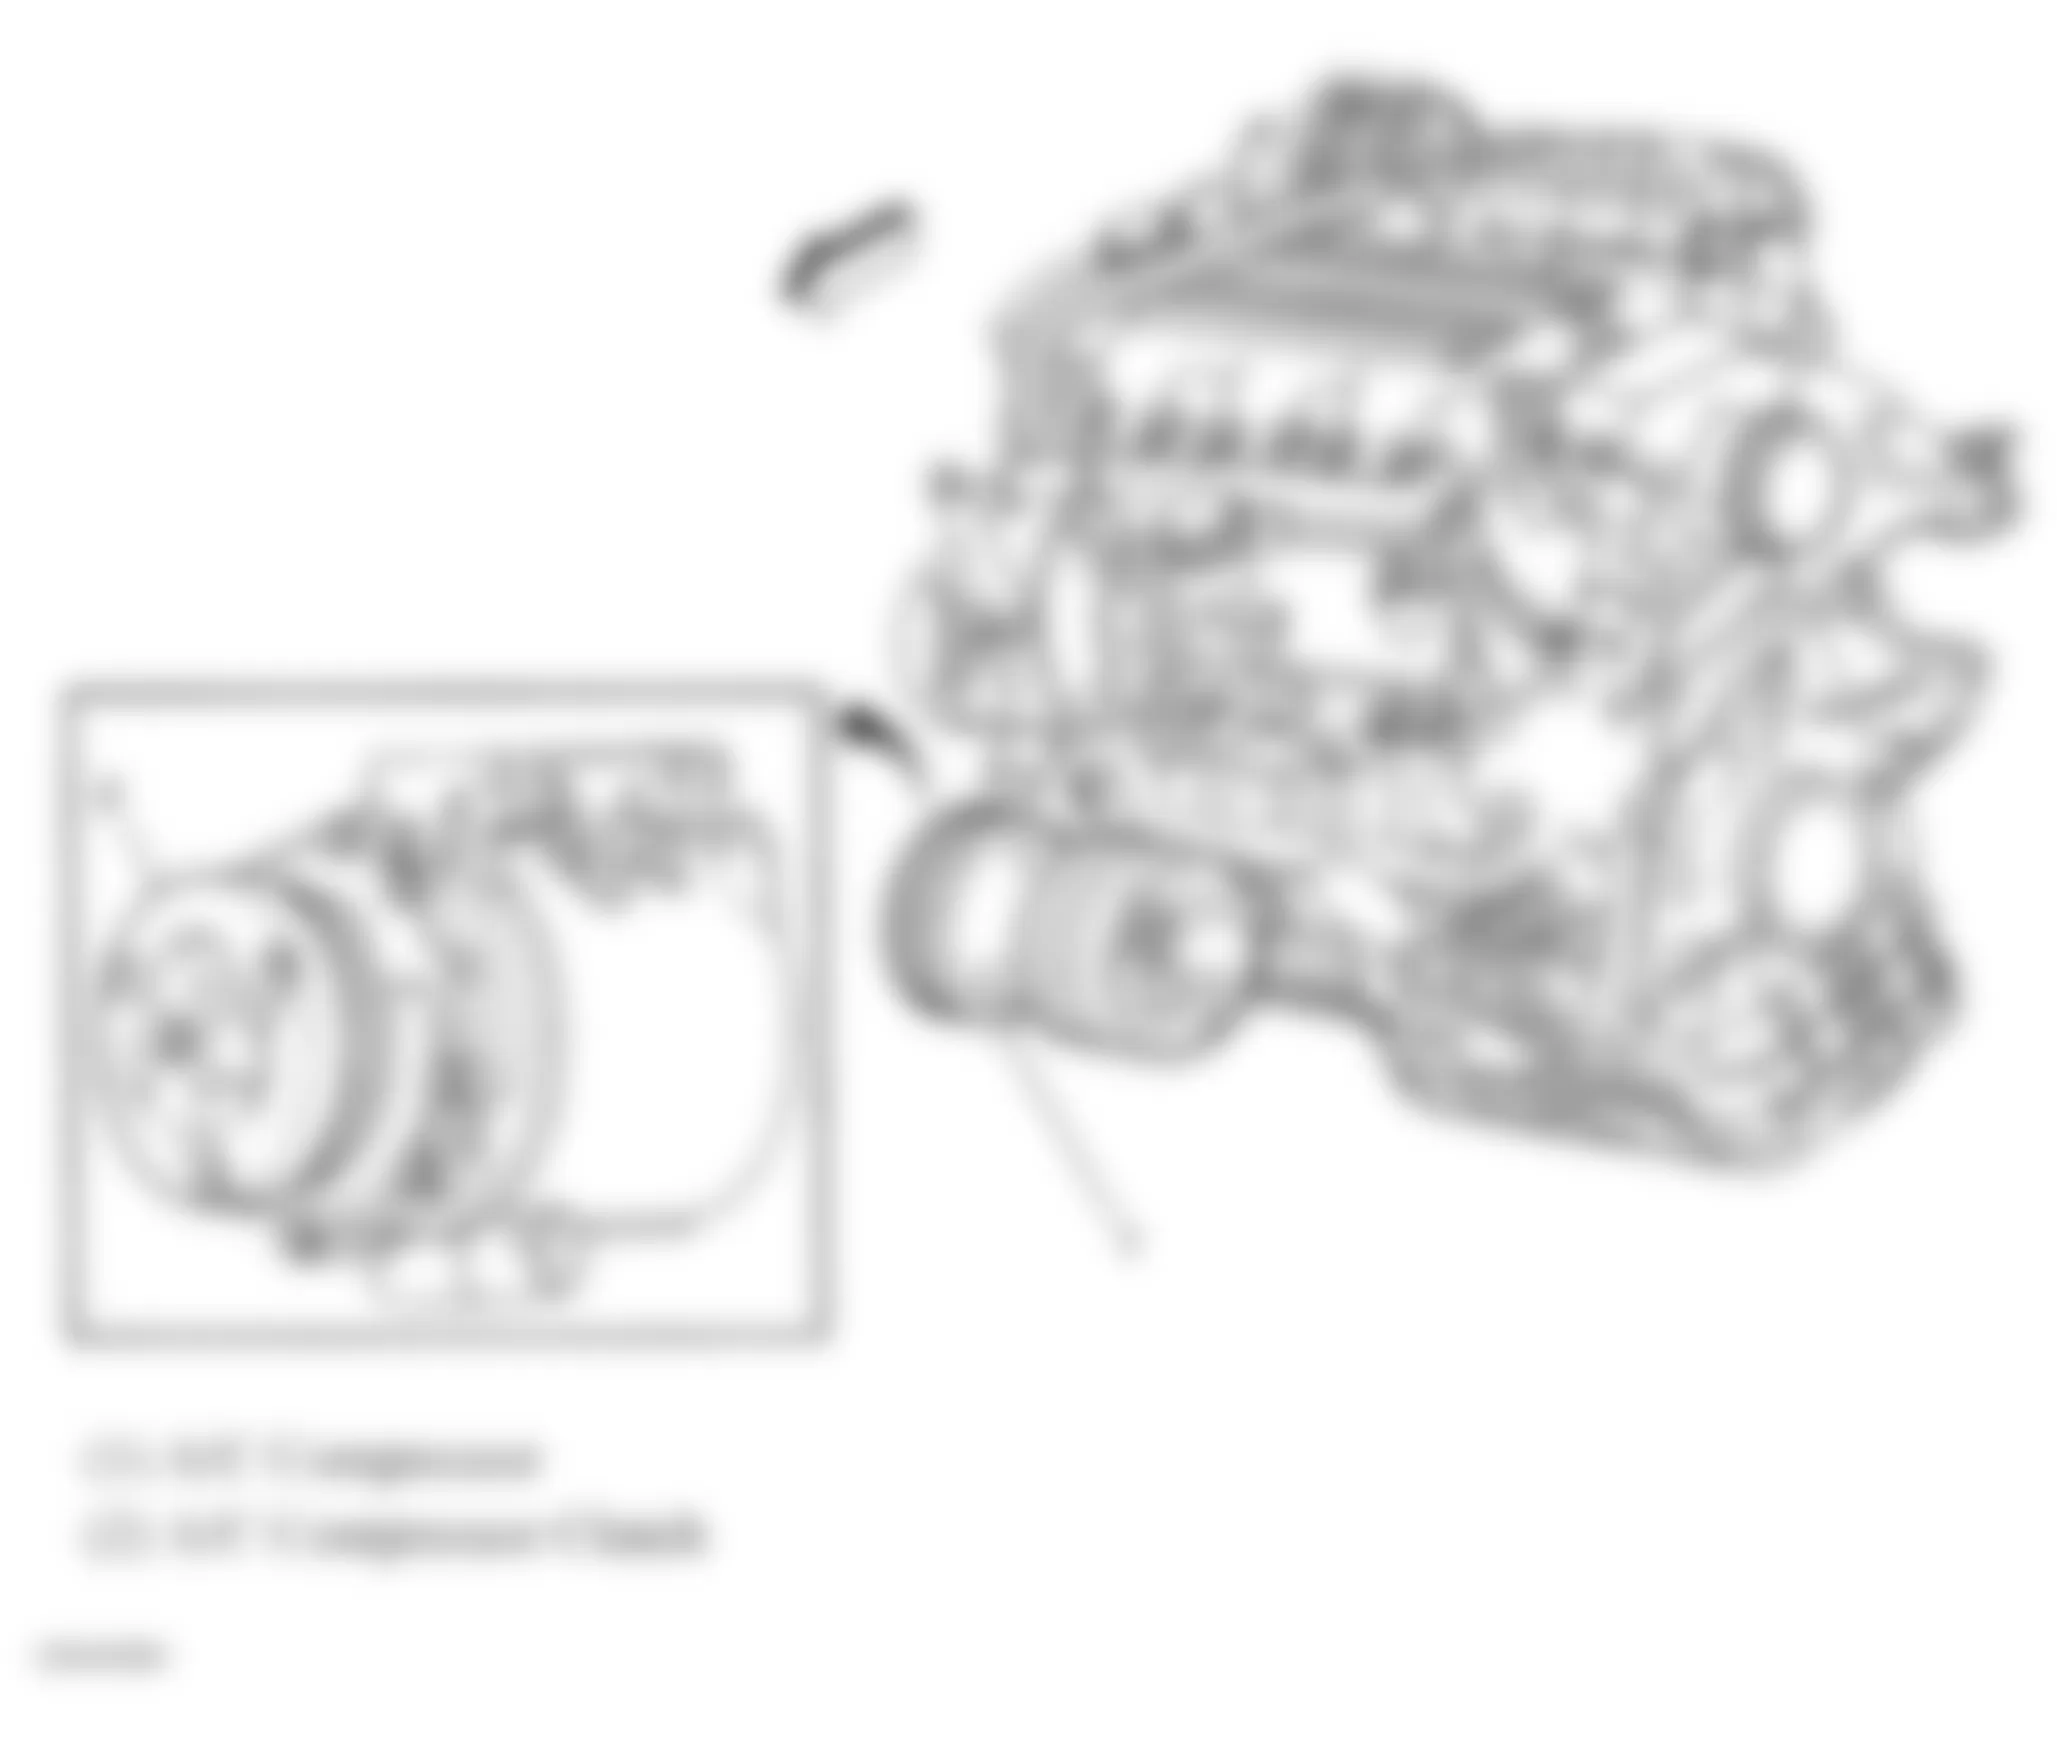 Buick Rendezvous CXL 2007 - Component Locations -  Front Of Engine